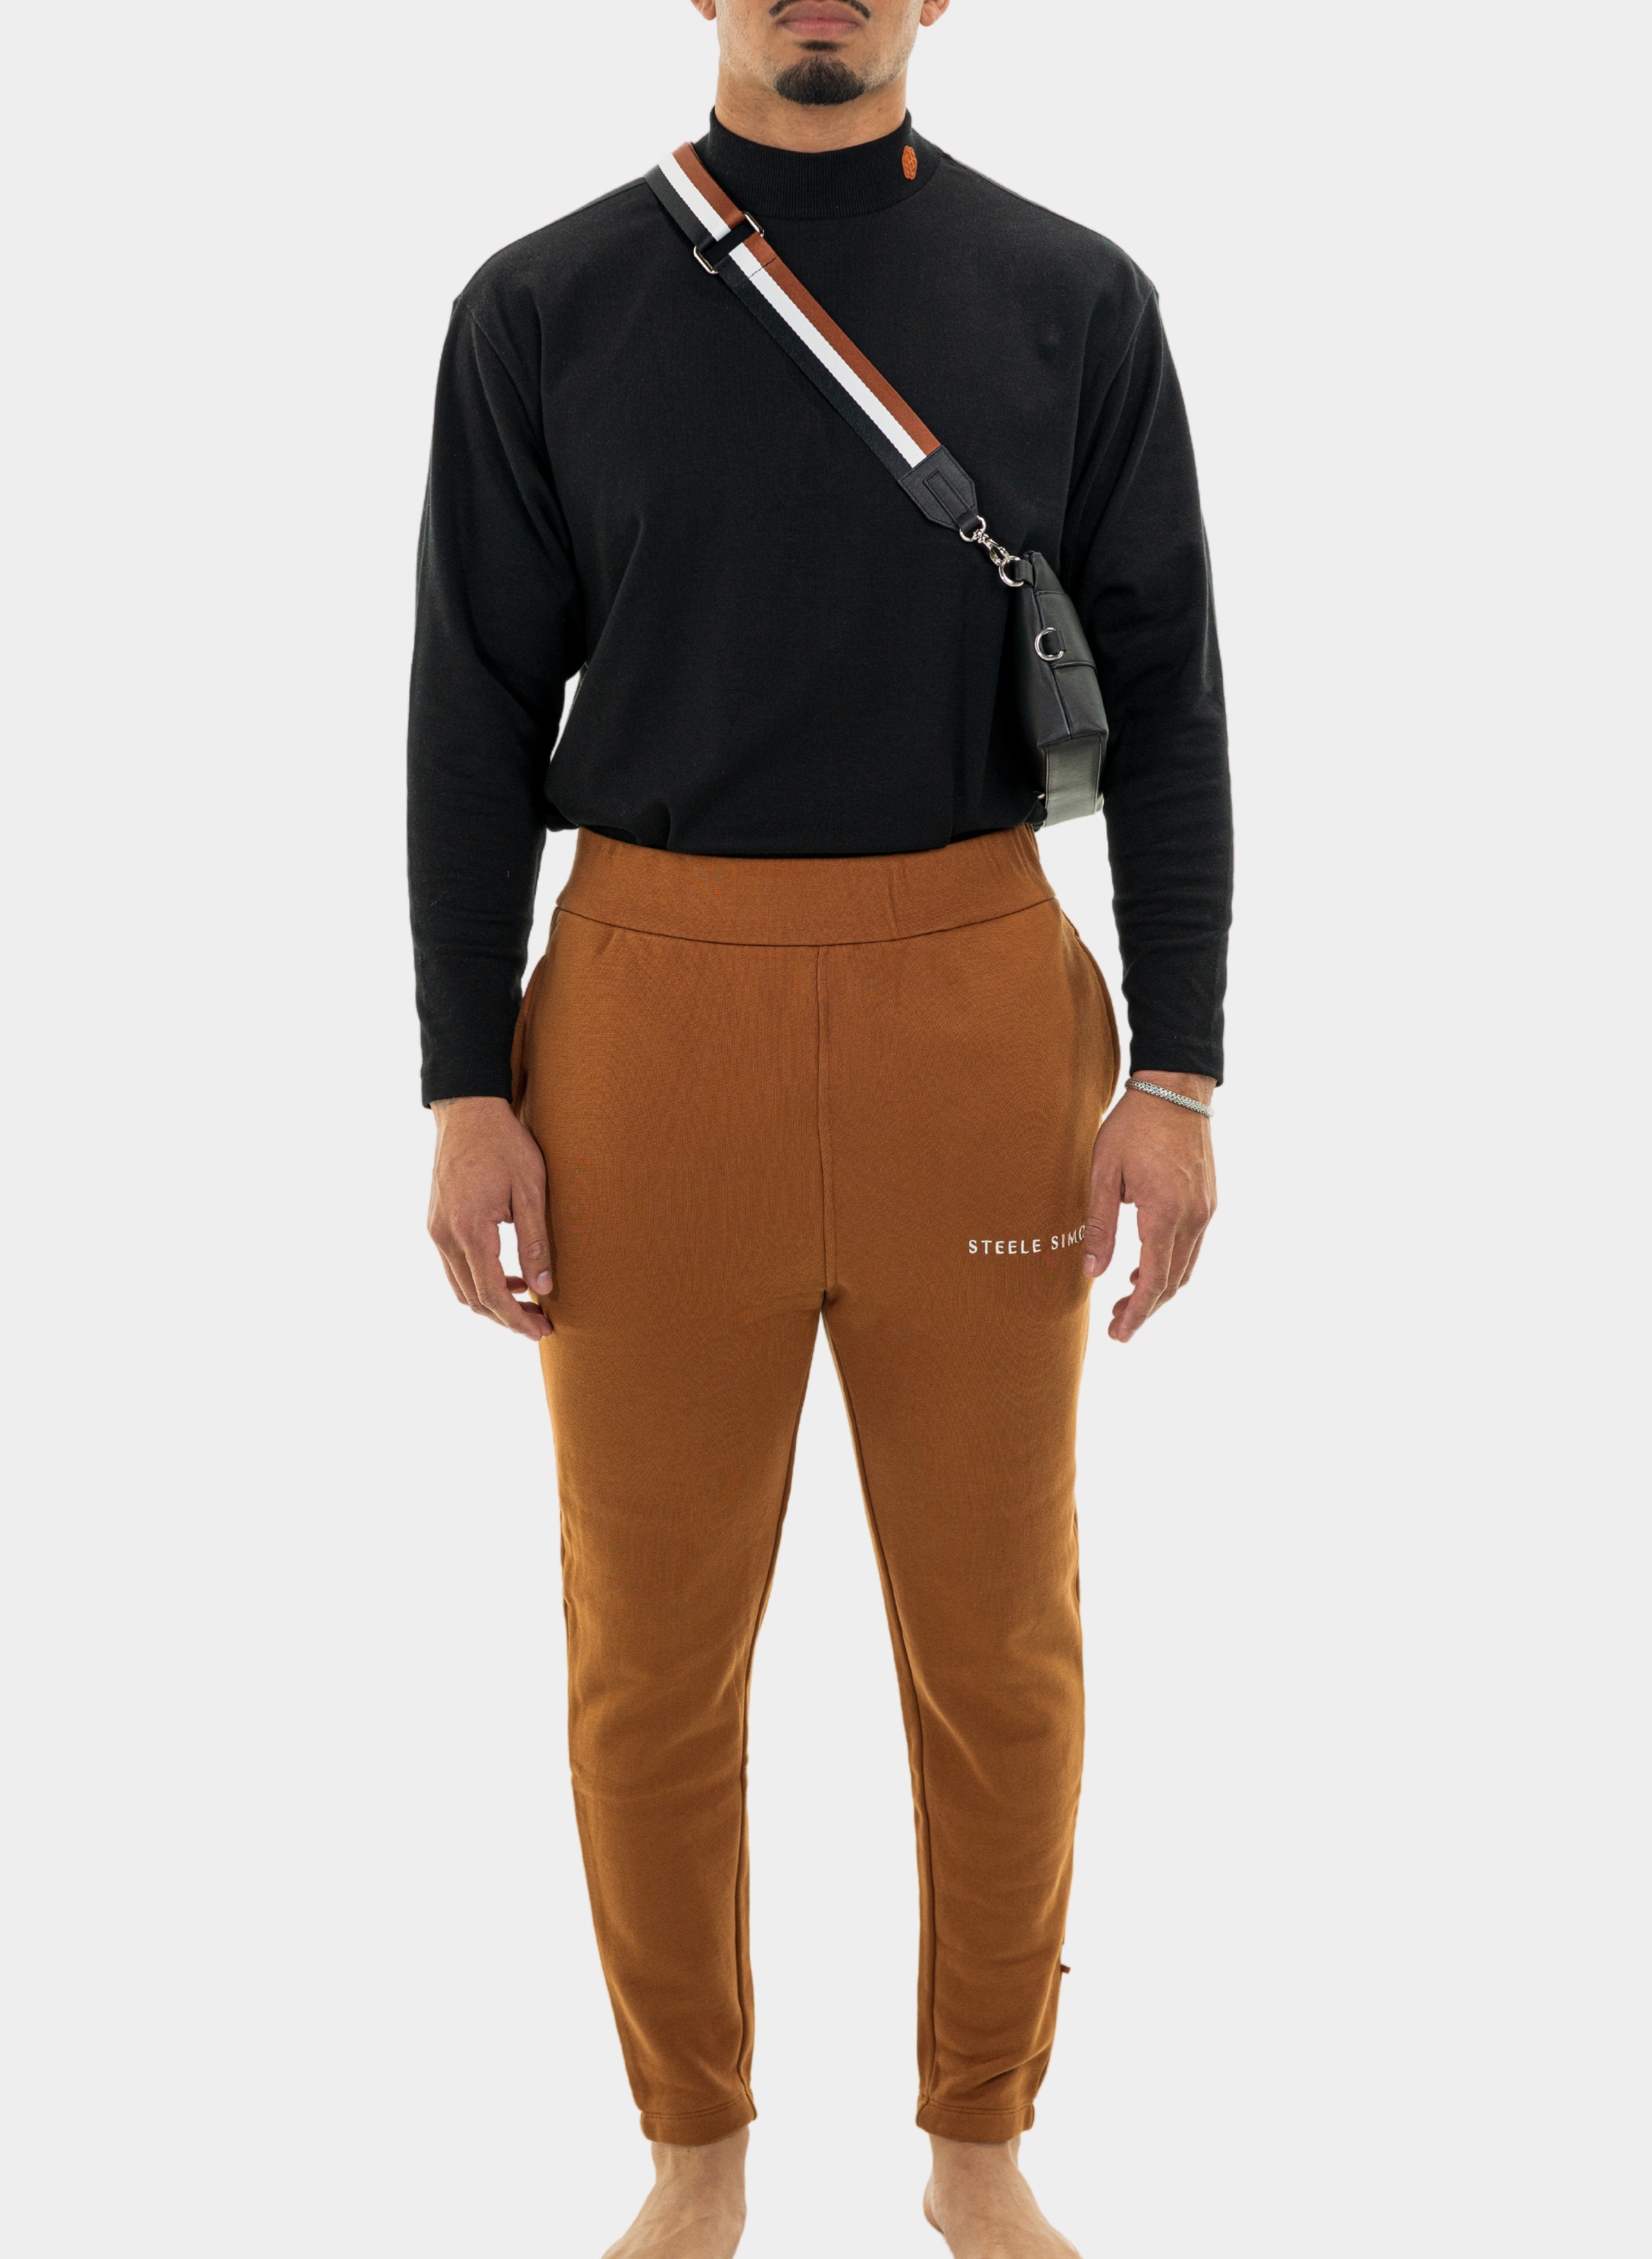 Signature Tapered Pants (Copper)